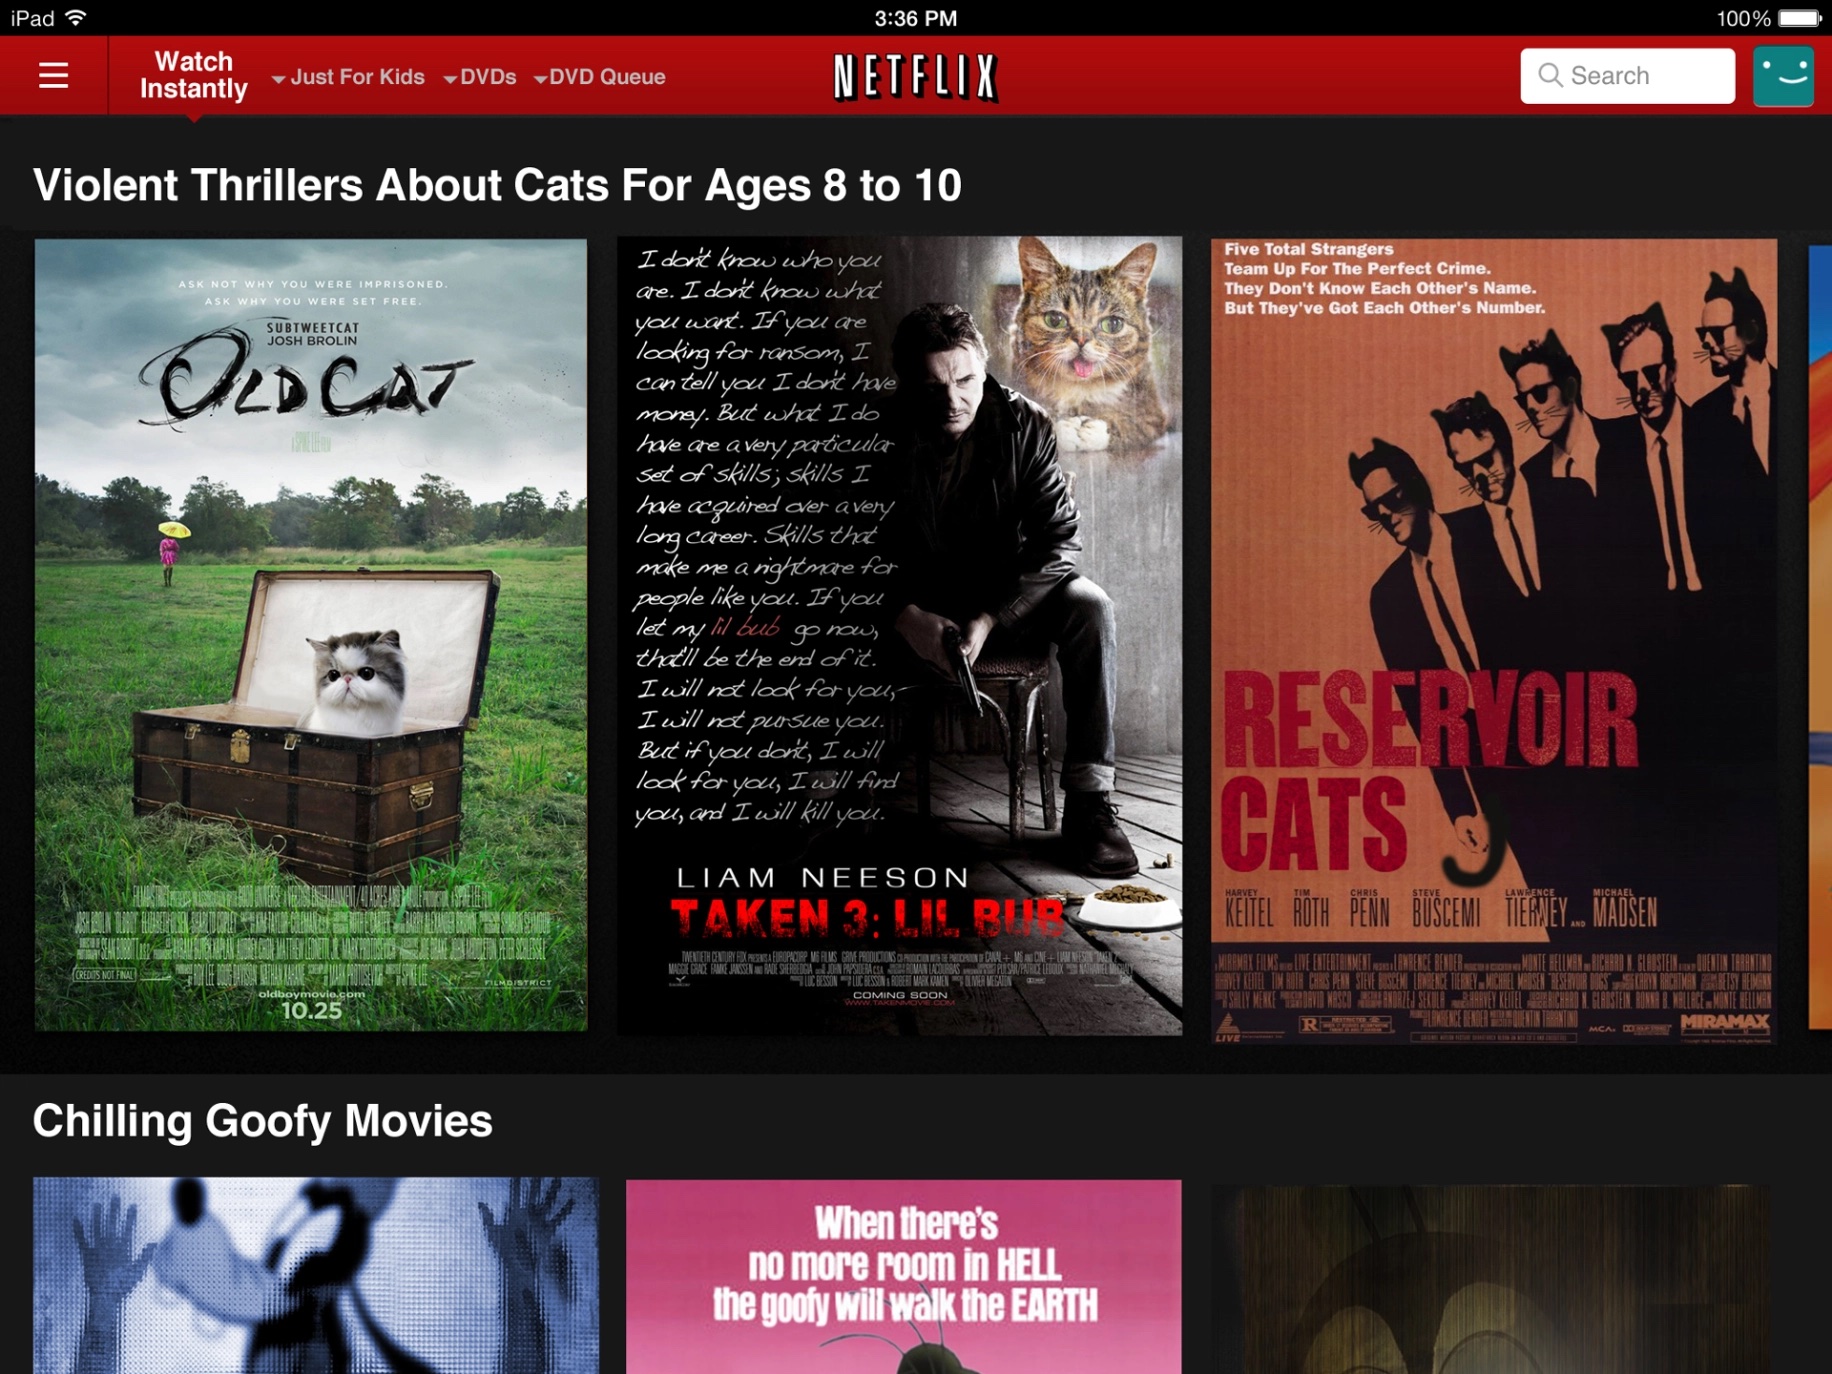 A fake screenshot showing the genre Violent Thrillers About Cats for Ages 8 to 10